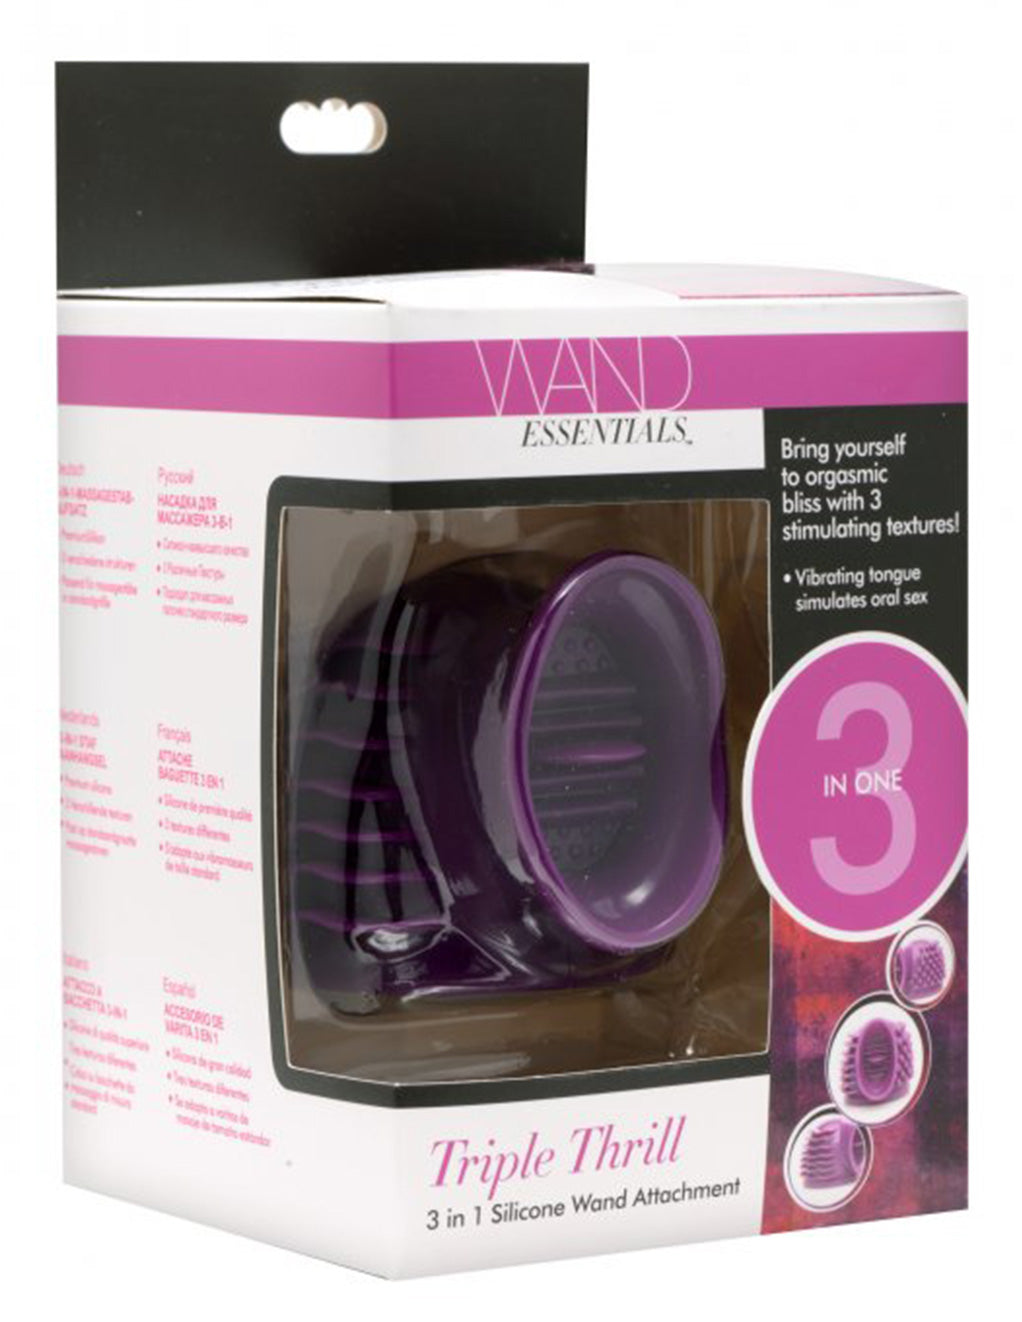 Wand Essentials Triple Thrill 3 in 1 Wand Attachment Packaging